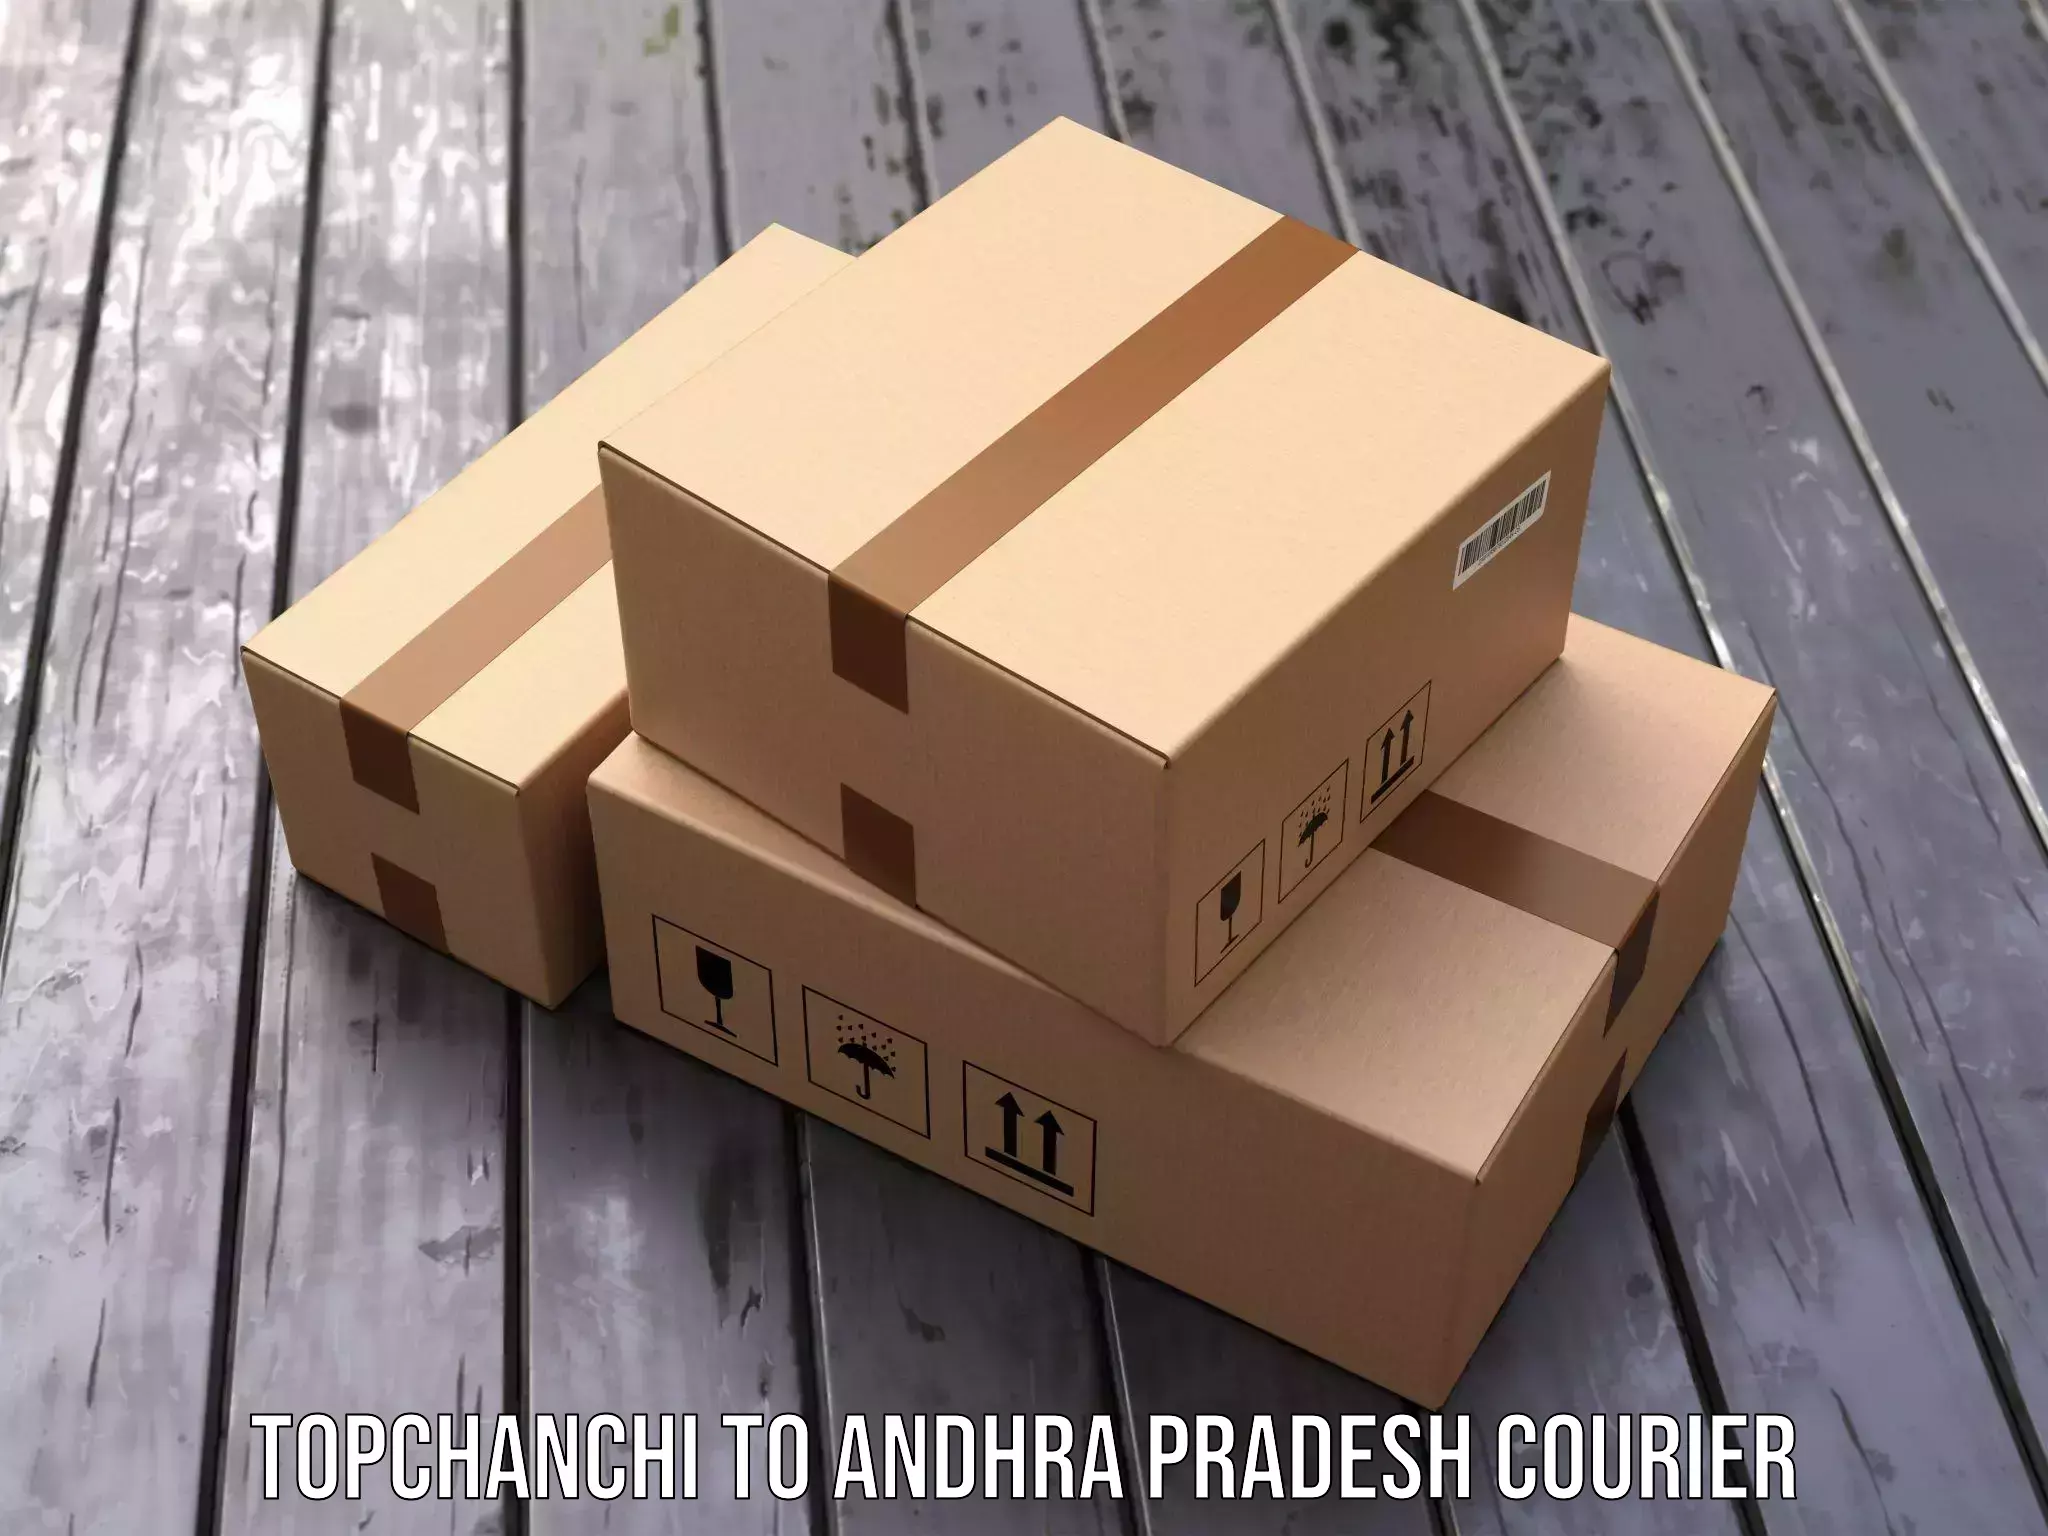 Nationwide delivery network Topchanchi to Andhra Pradesh